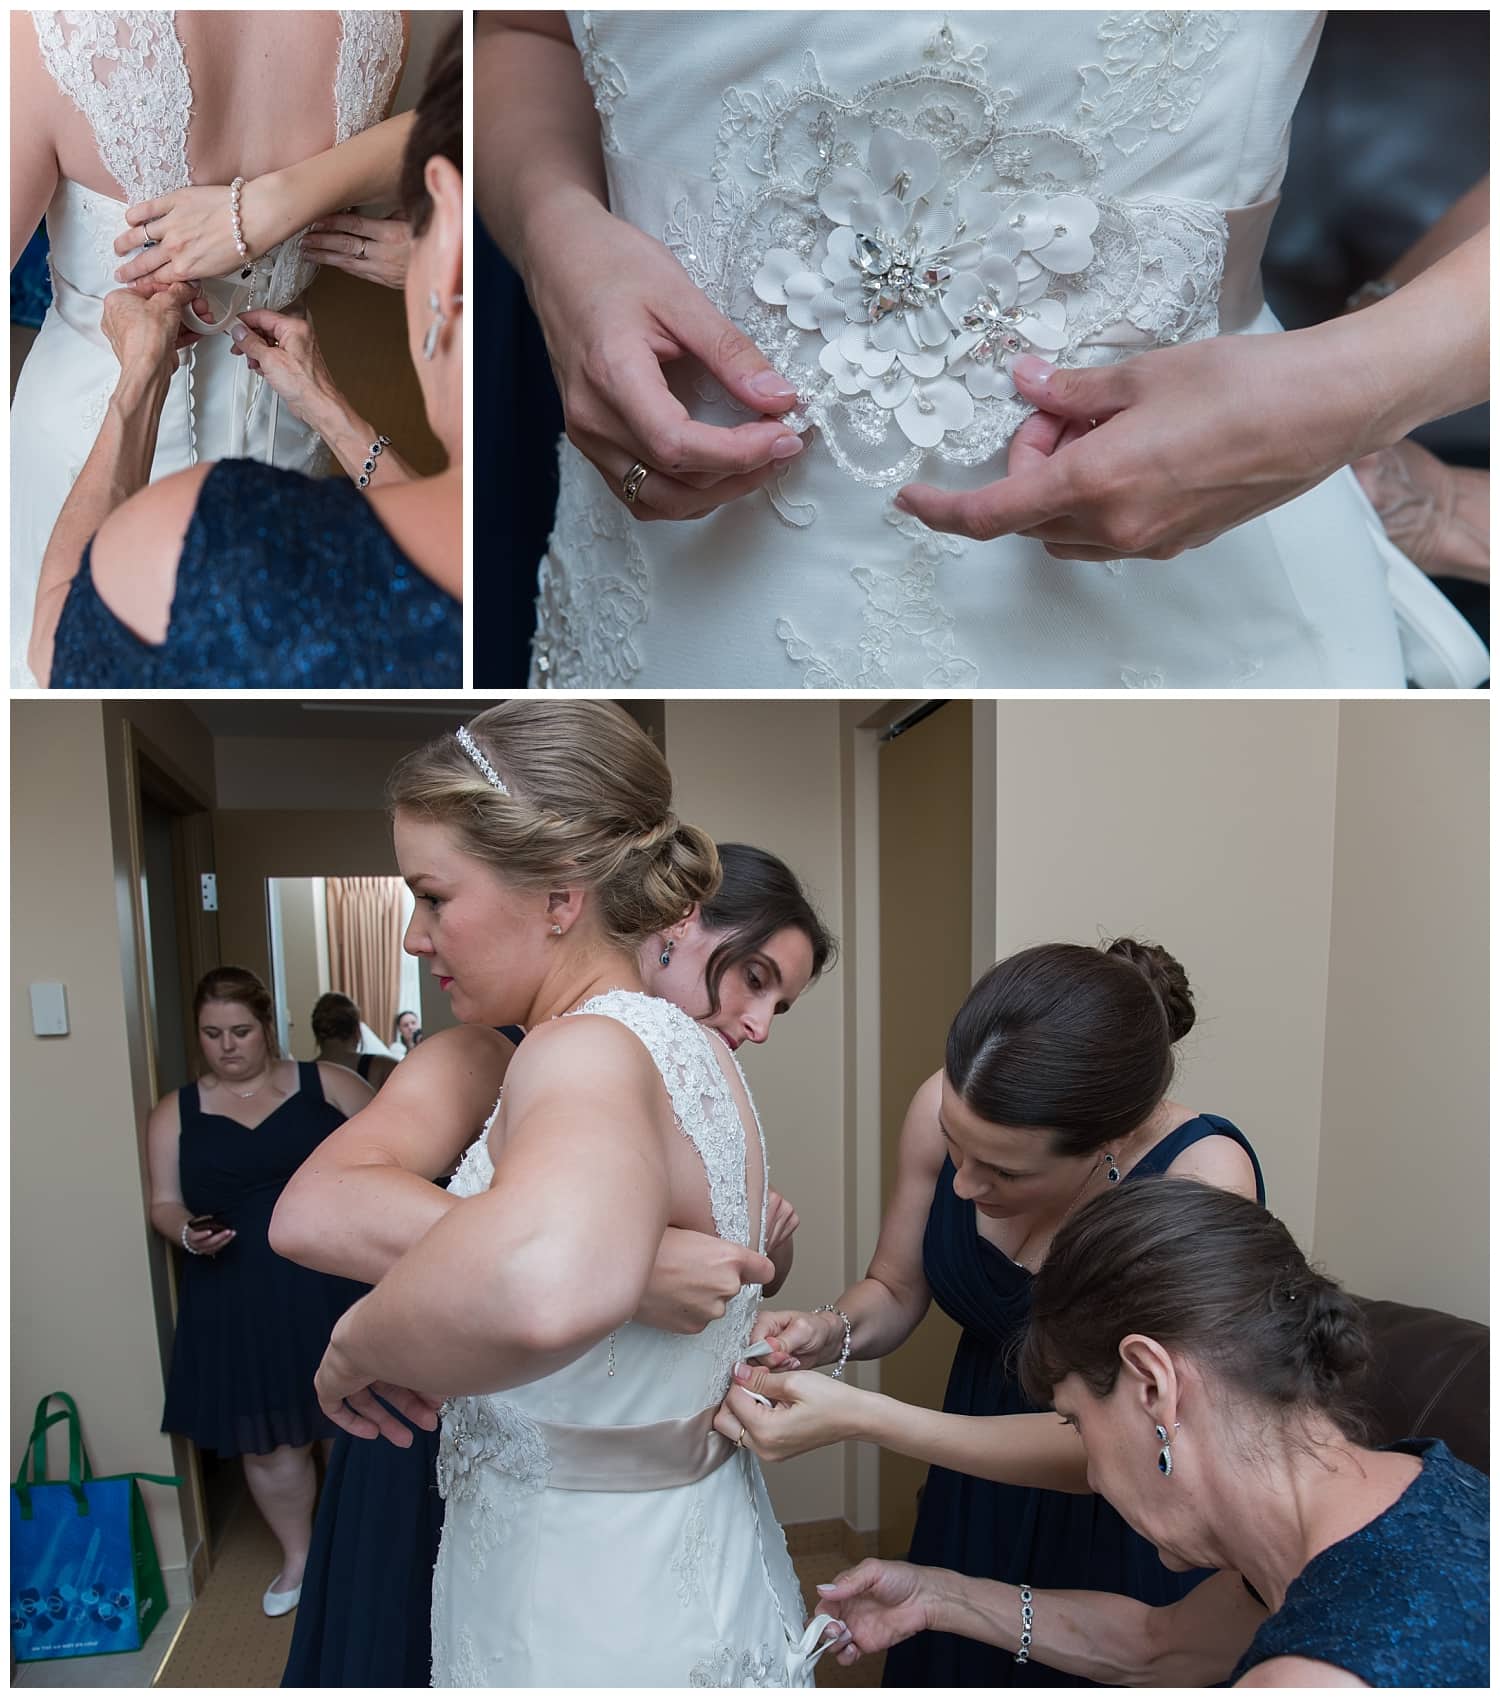 The bride with her bridesmaids get ready for her wedding at Juno Tower in Halifax, NS.